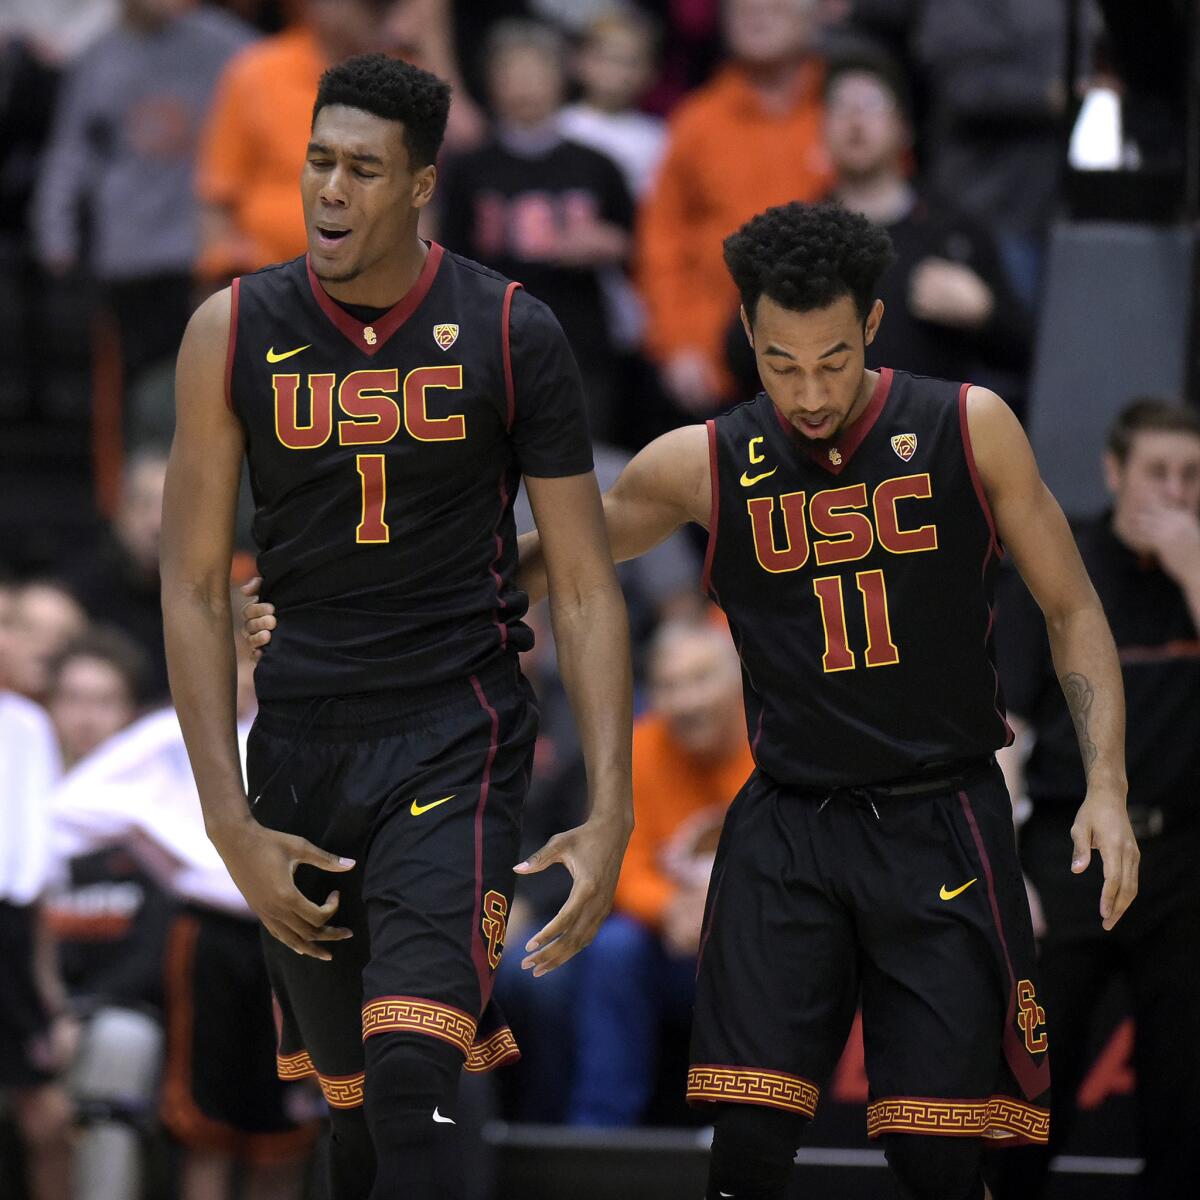 USC's Charles Buggs (1) and Jordan McLaughlin (11) walk away from a small scuffle against Oregon State in the second half on Dec. 28.